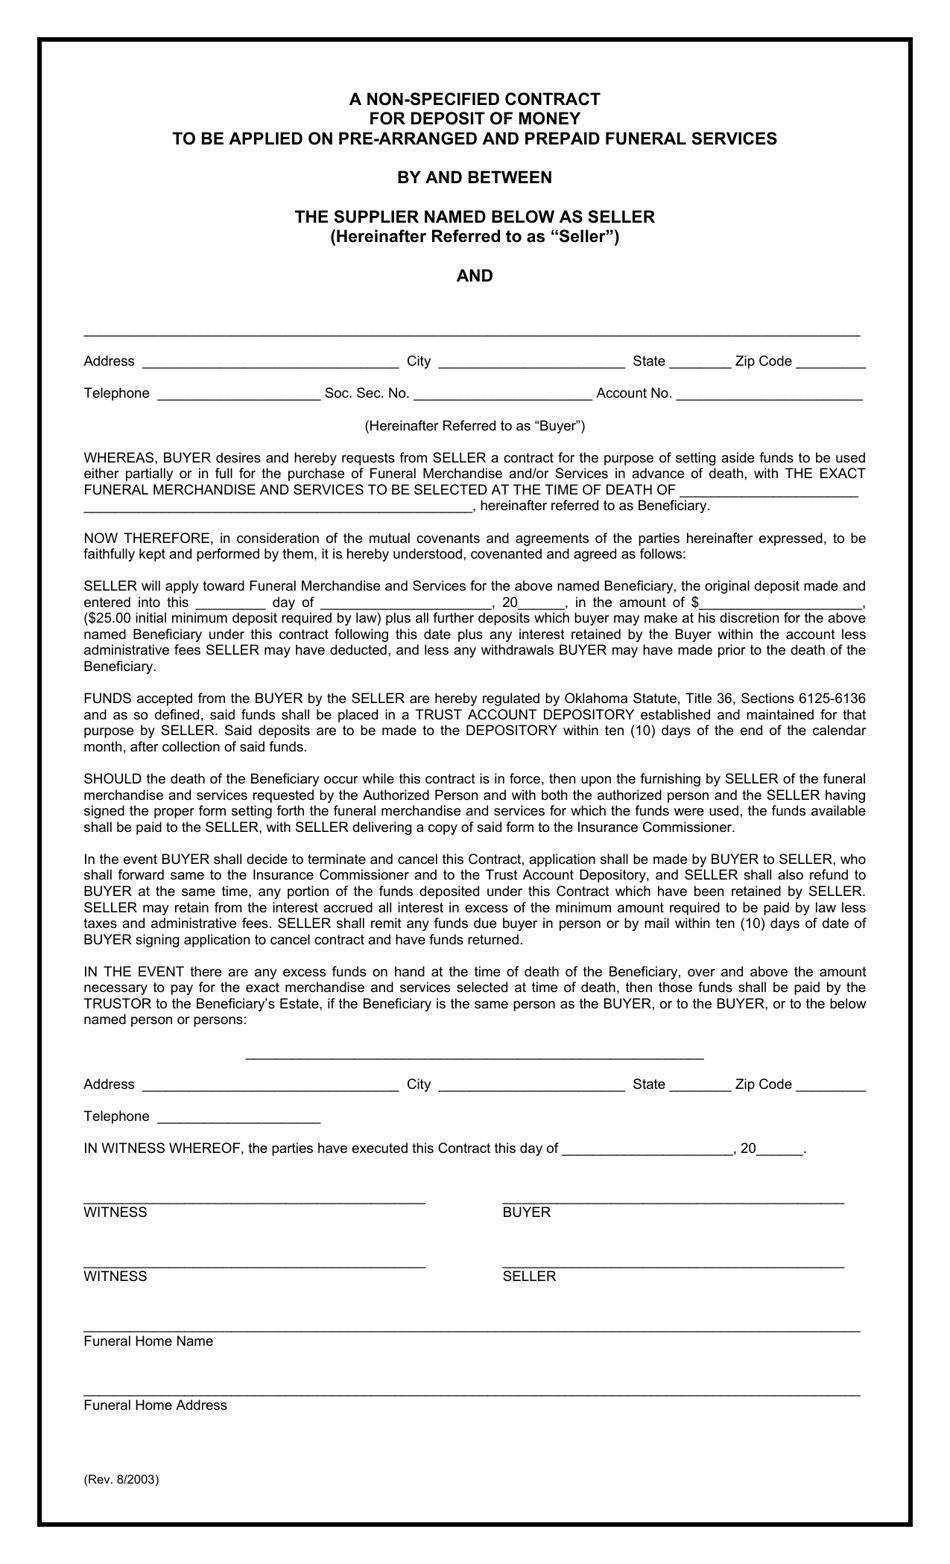 A Non-specified Contract for Deposit of Money to Be Applied on Pre-arranged and Prepaid Funeral Services - Oklahoma, Page 1